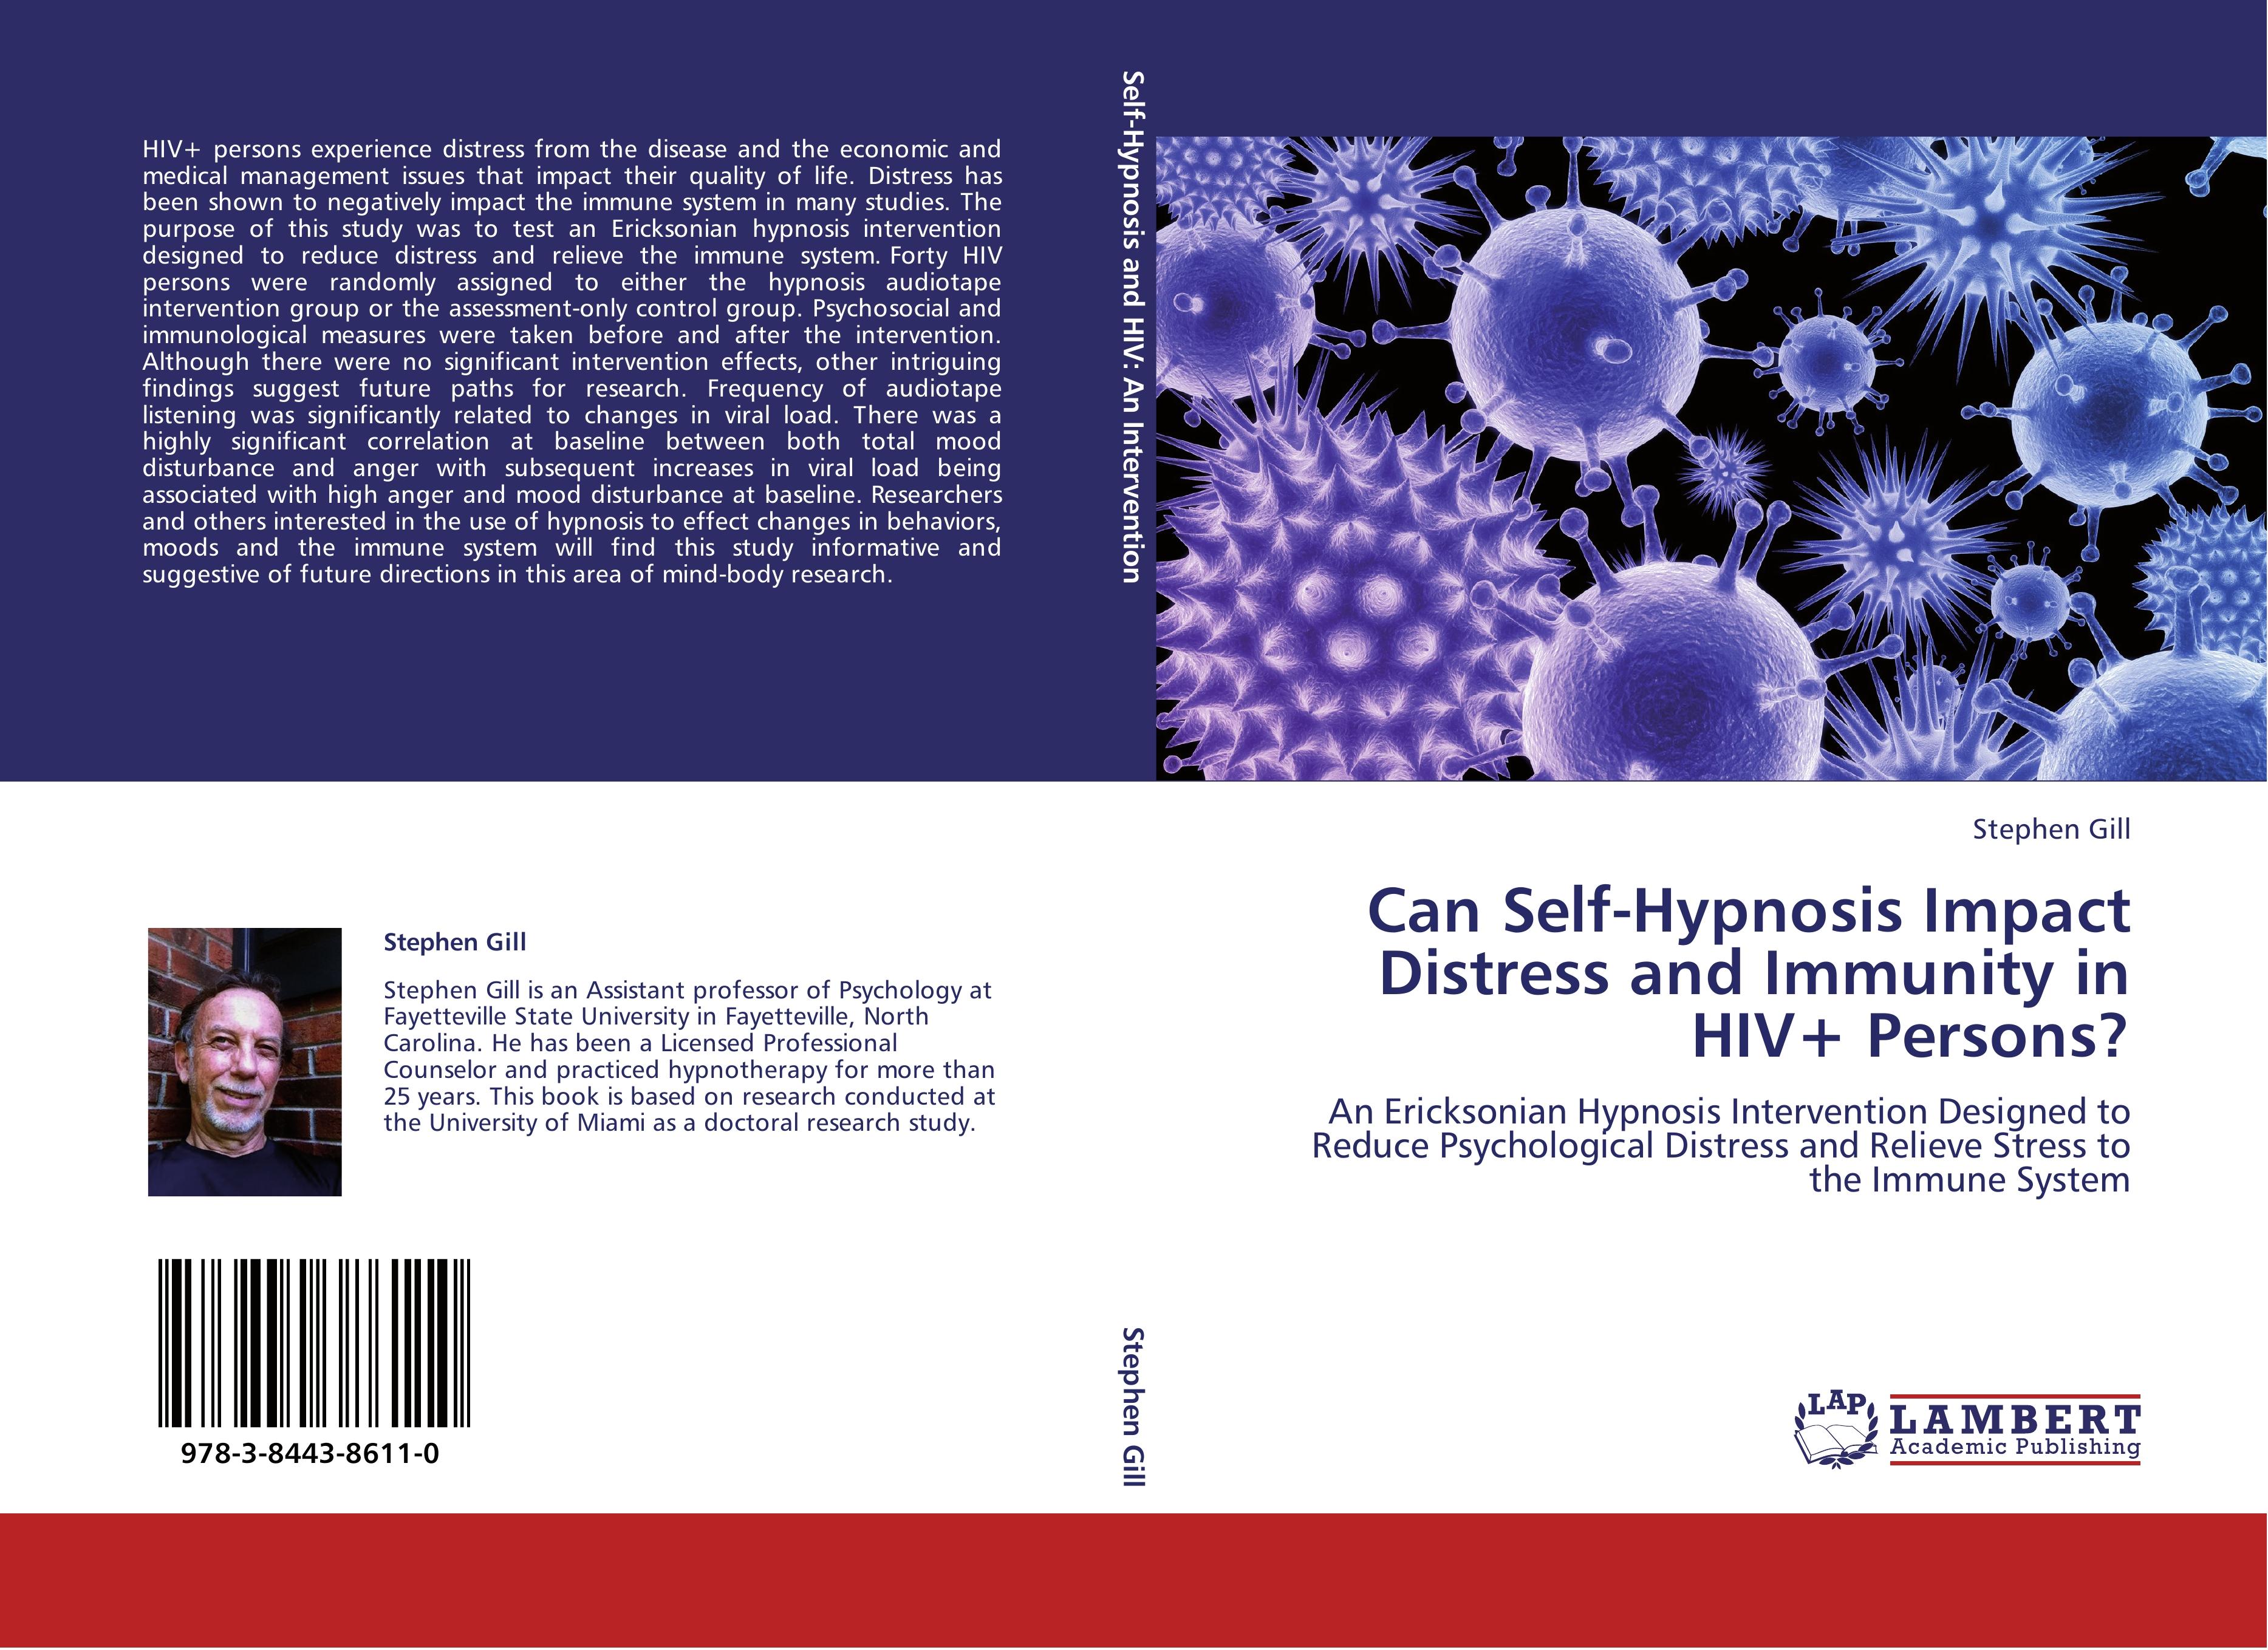 Can Self-Hypnosis Impact Distress and Immunity in HIV+ Persons? - Stephen Gill